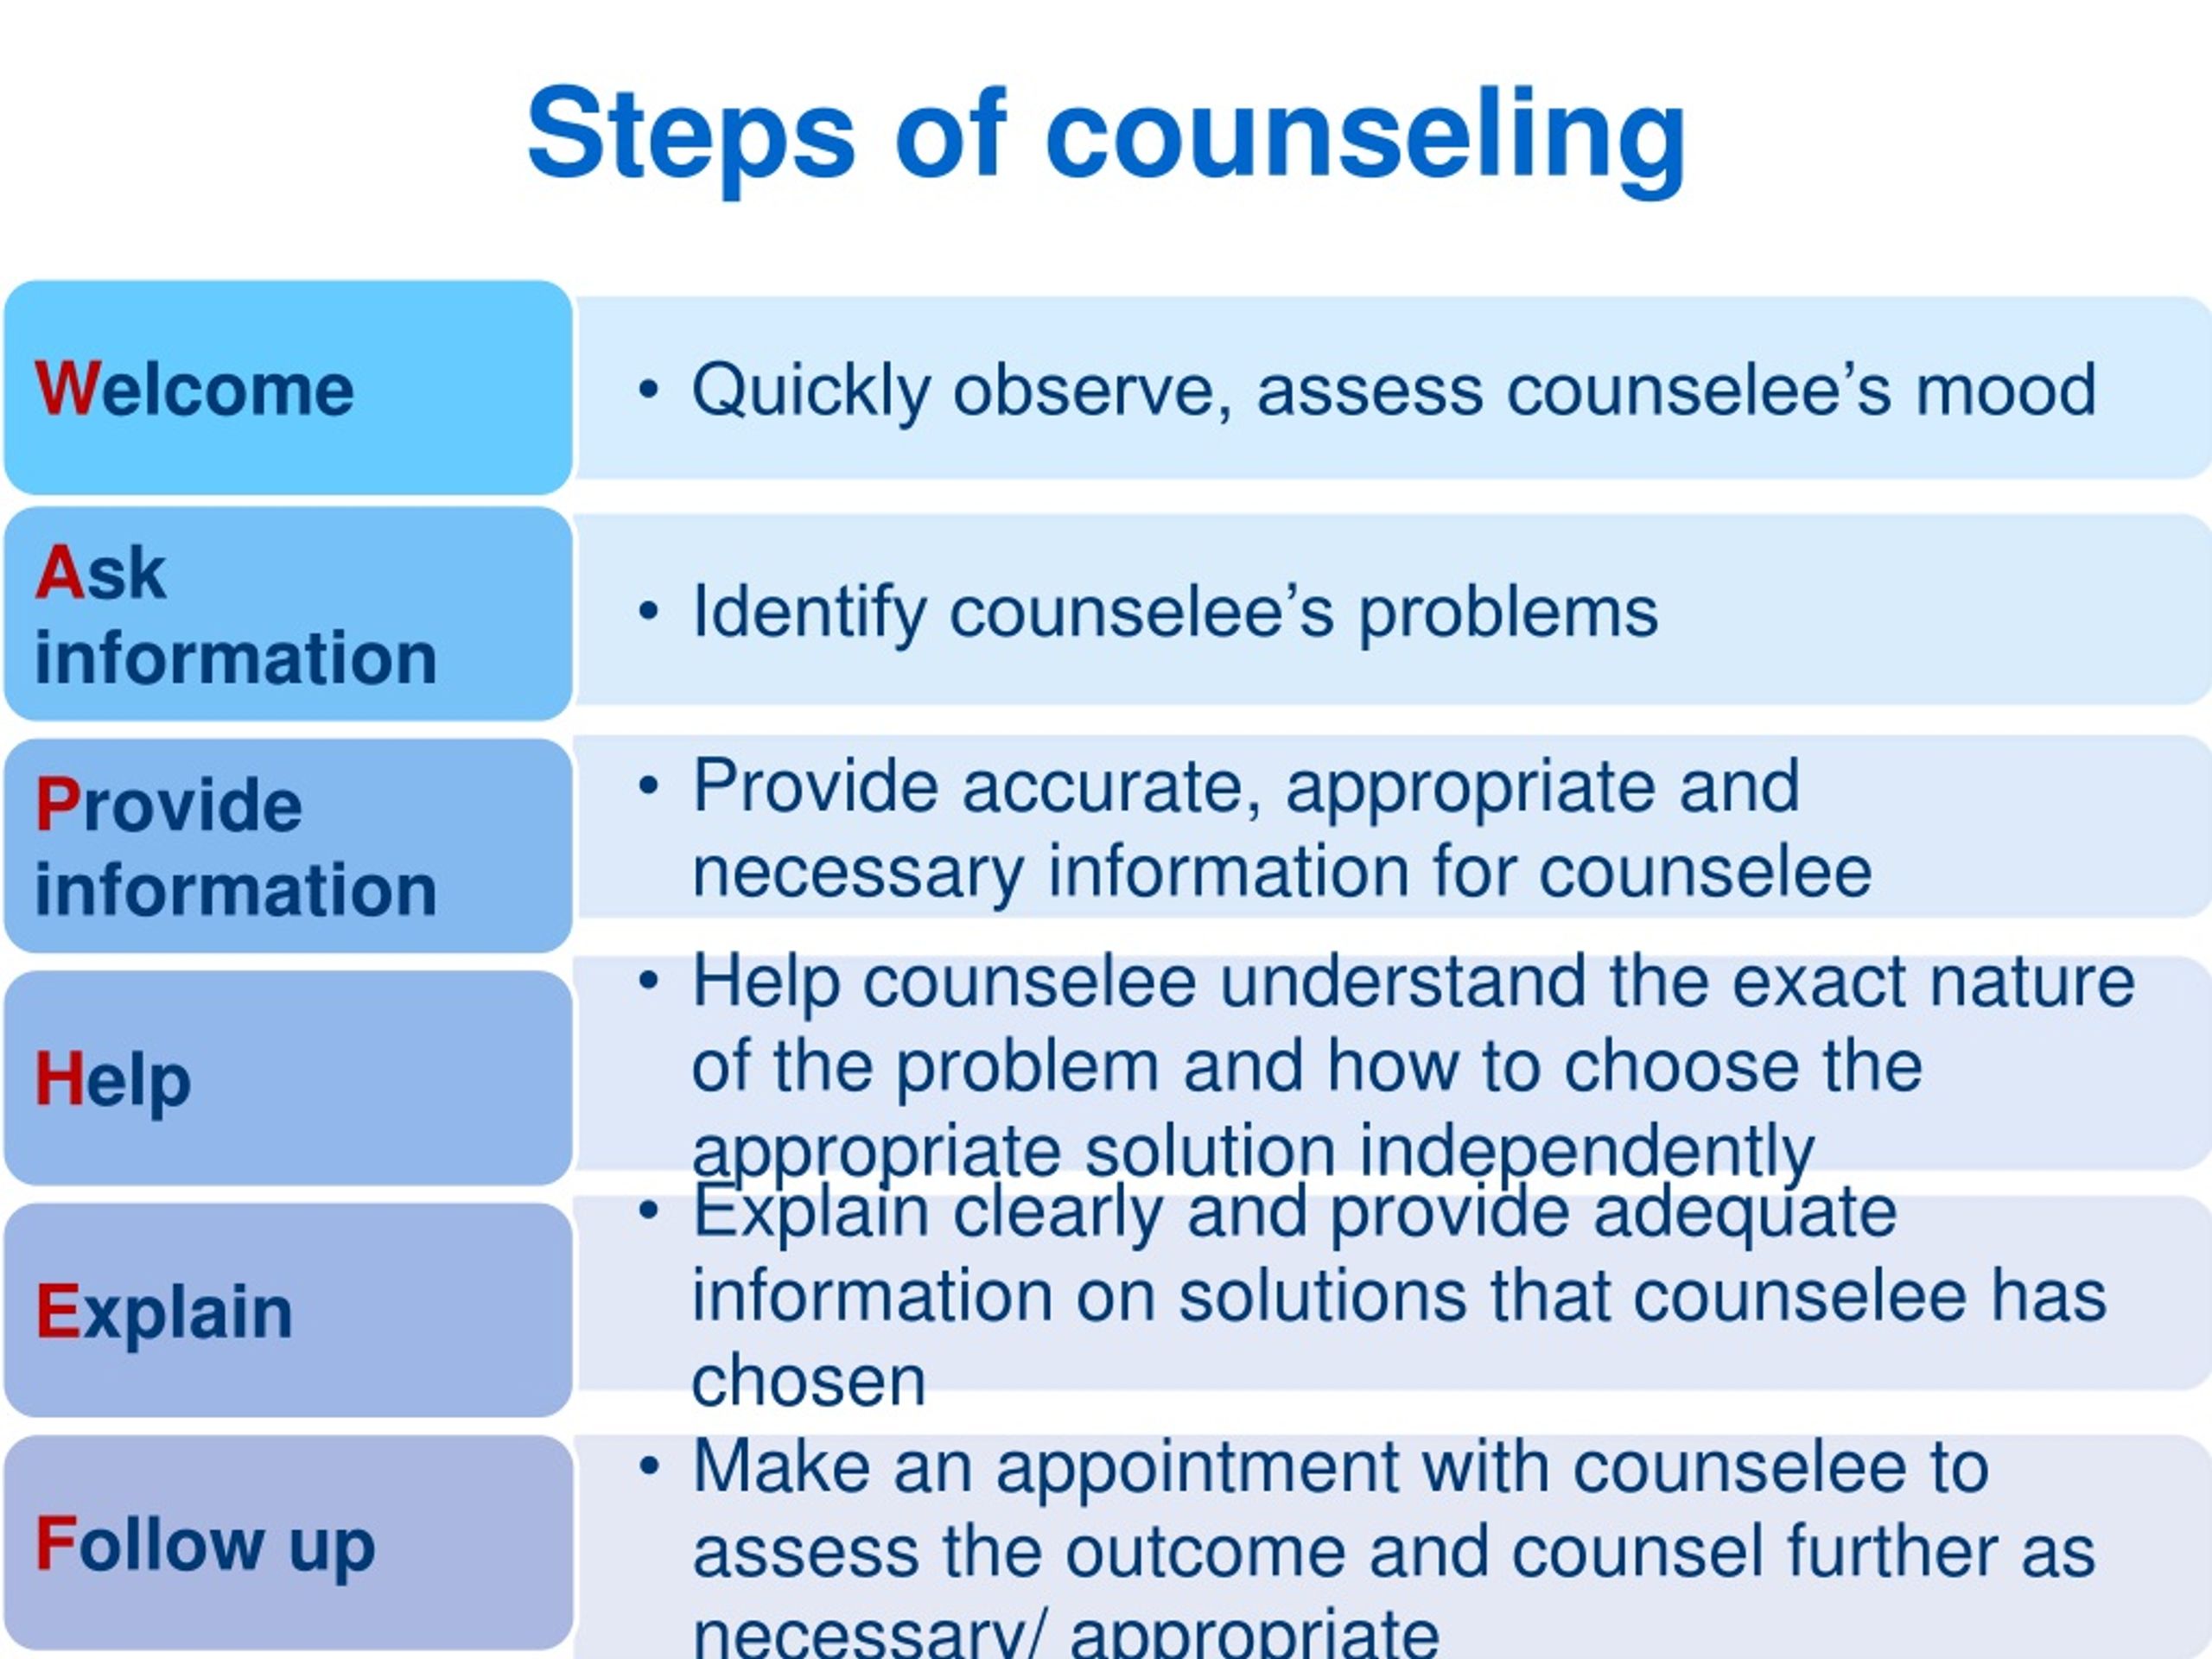 further research about counseling